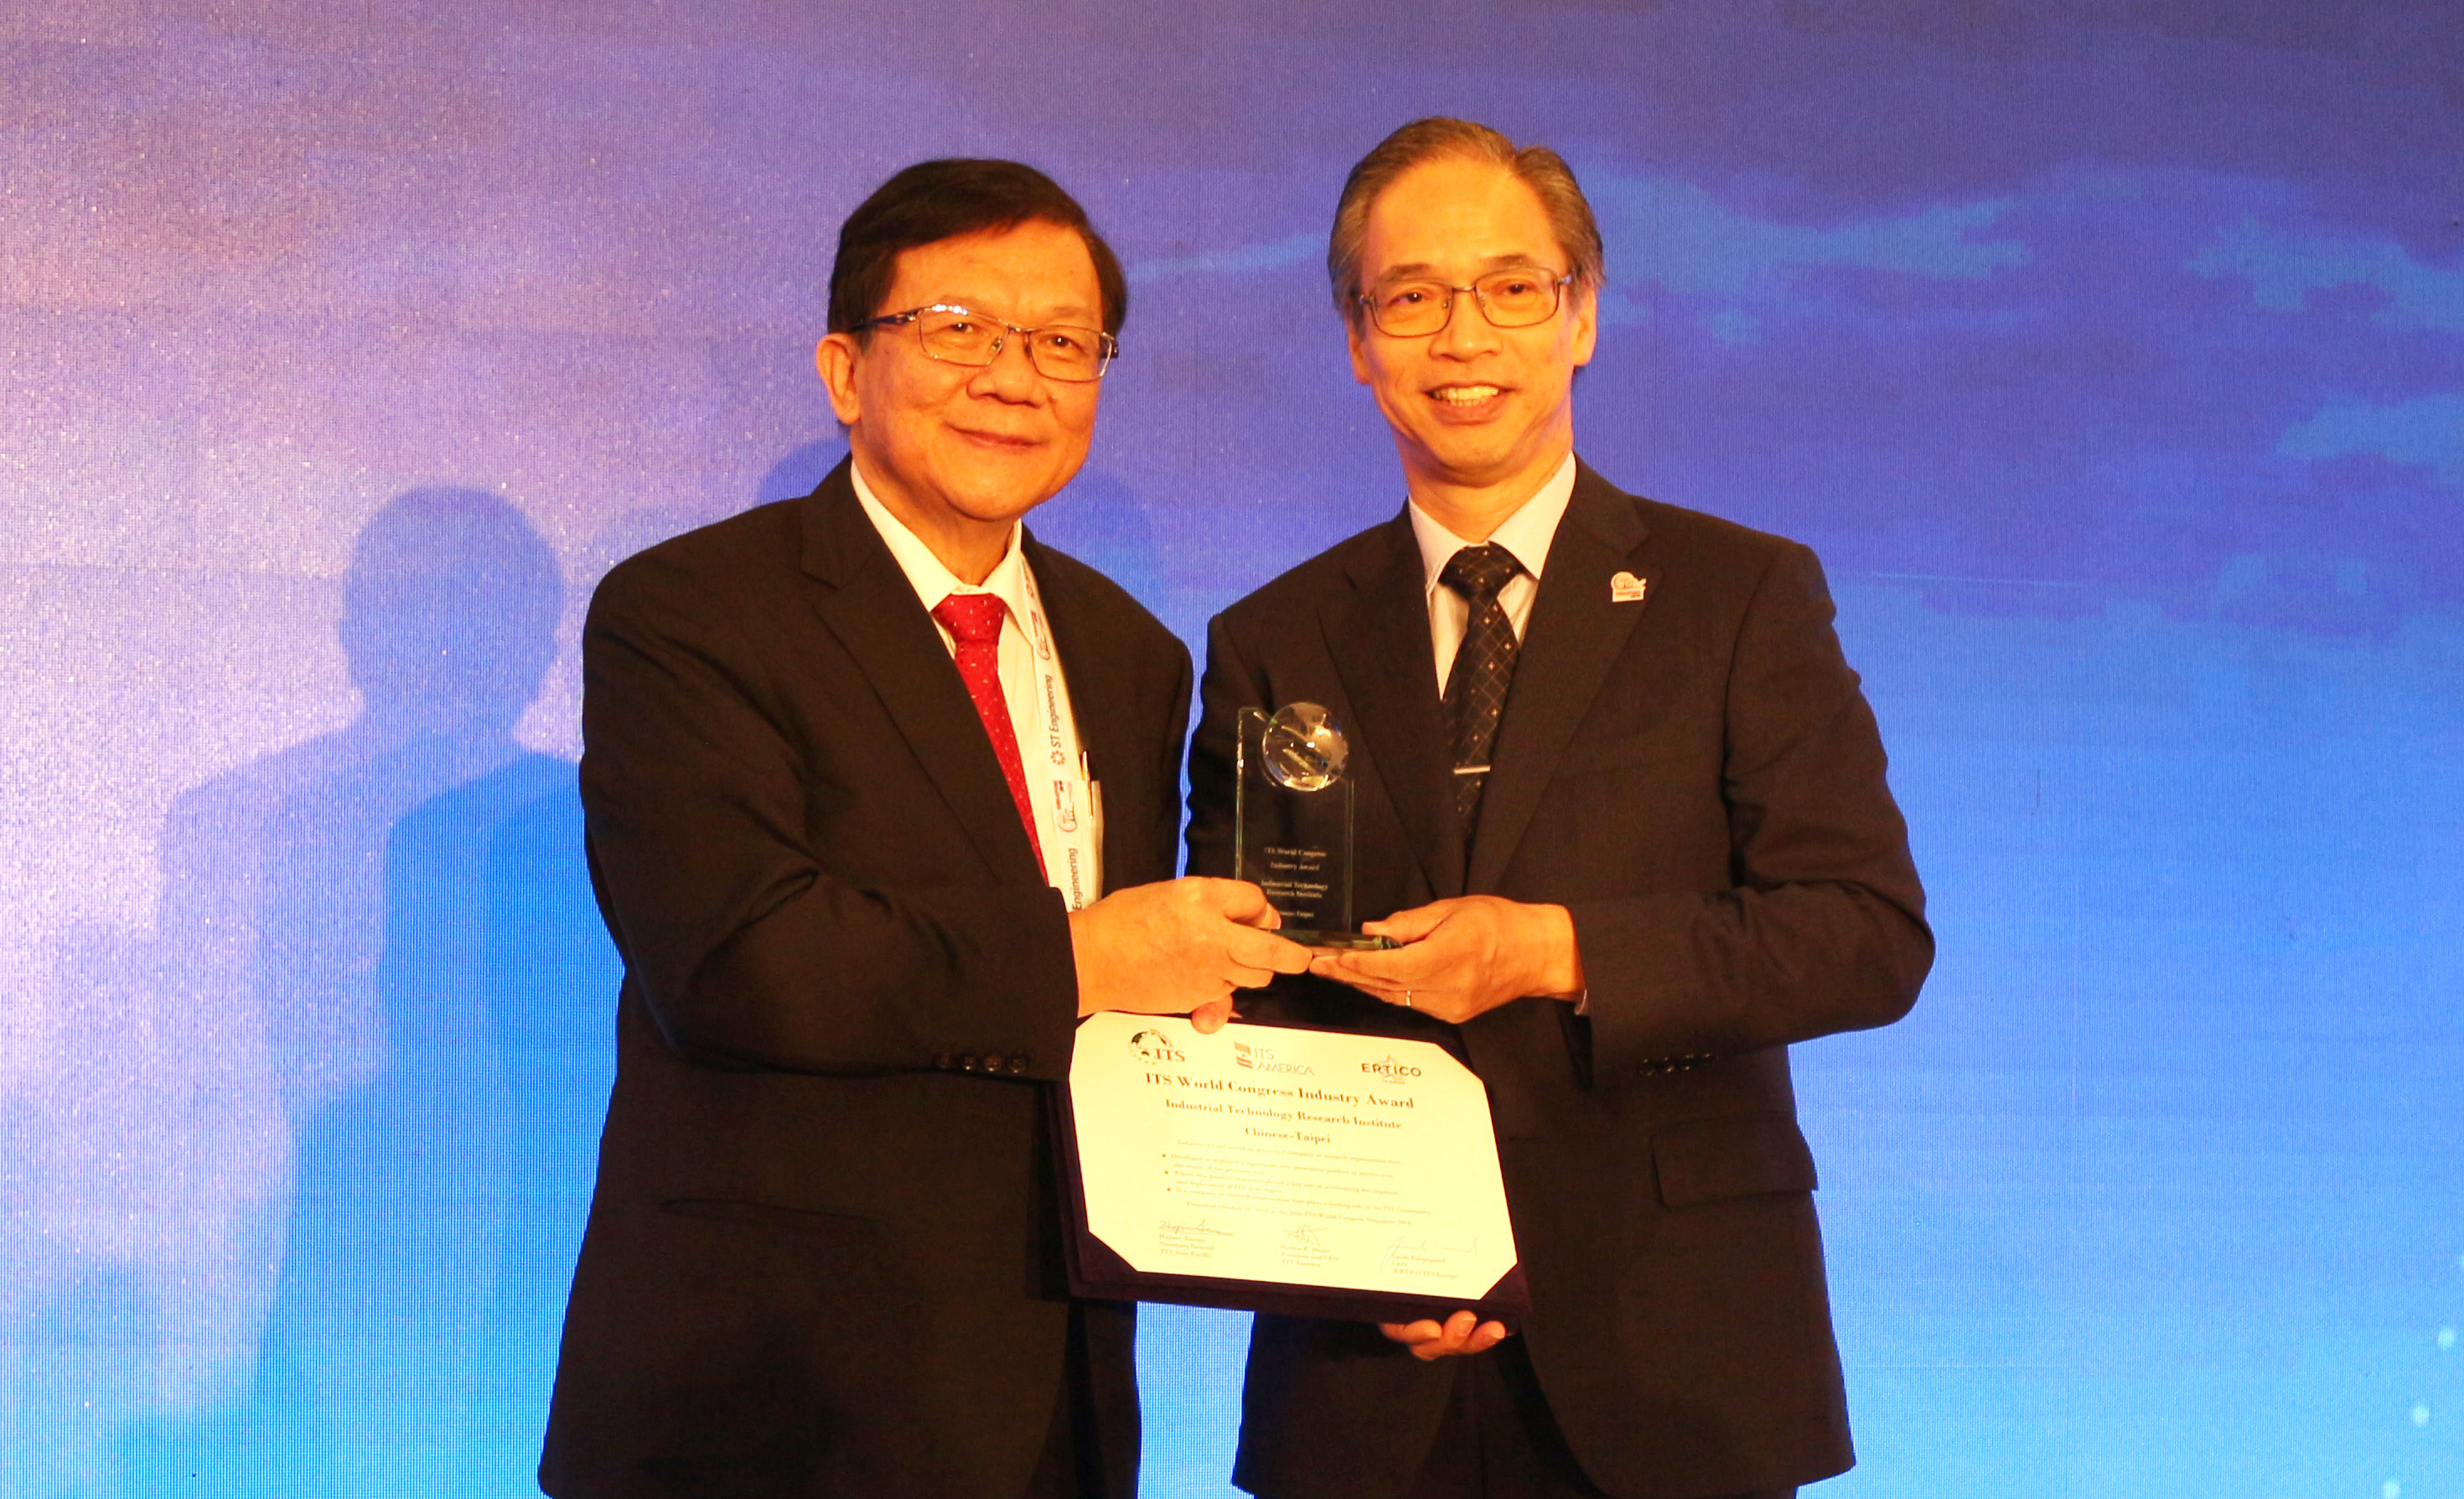 ITRI Chairman Chih-Kung Lee (left) accepted the Industry Award from ITS Asia-Pacific Secretary General Hajime Amano (right) at ITS World Congress 2019.